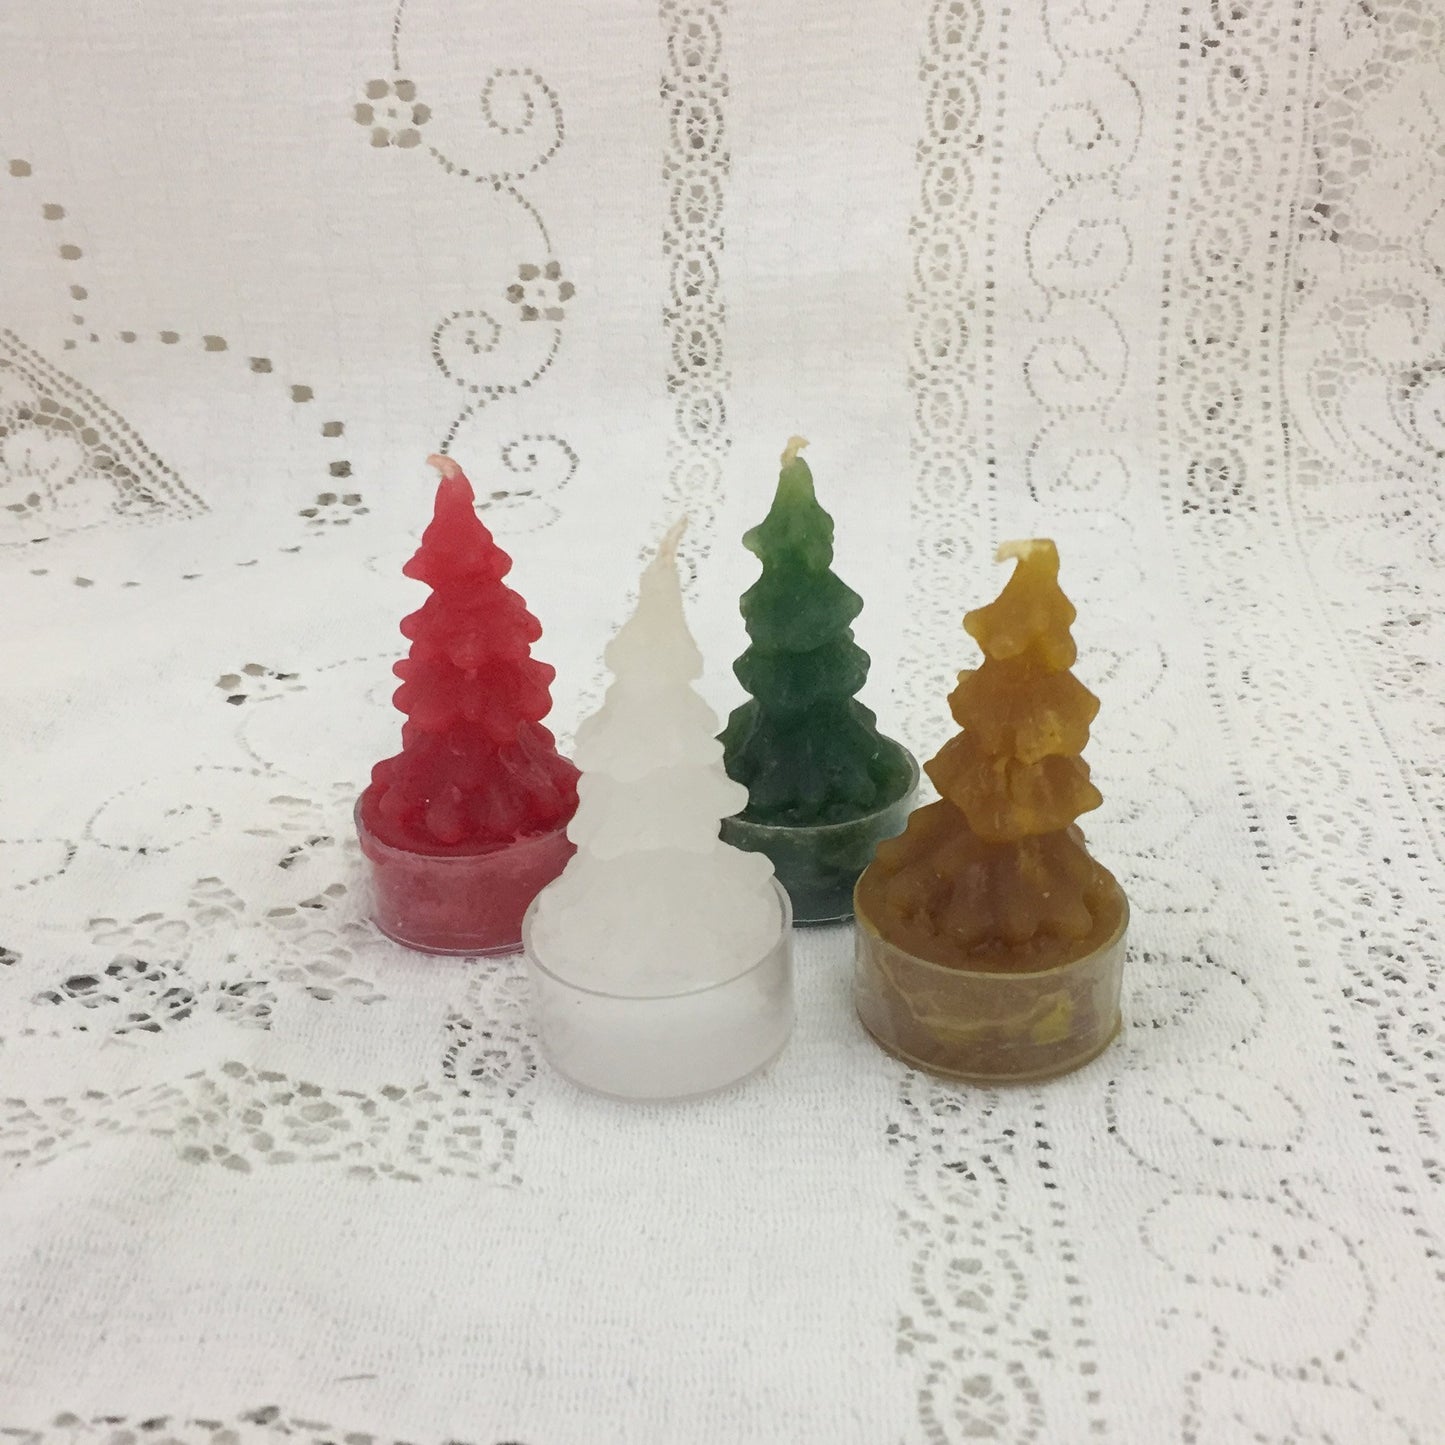 Evergreen Tree candles, 4"D x 9 1/2"H, or small trees 3 pkg., 4 solid colours - Fanny Bay Candle Company